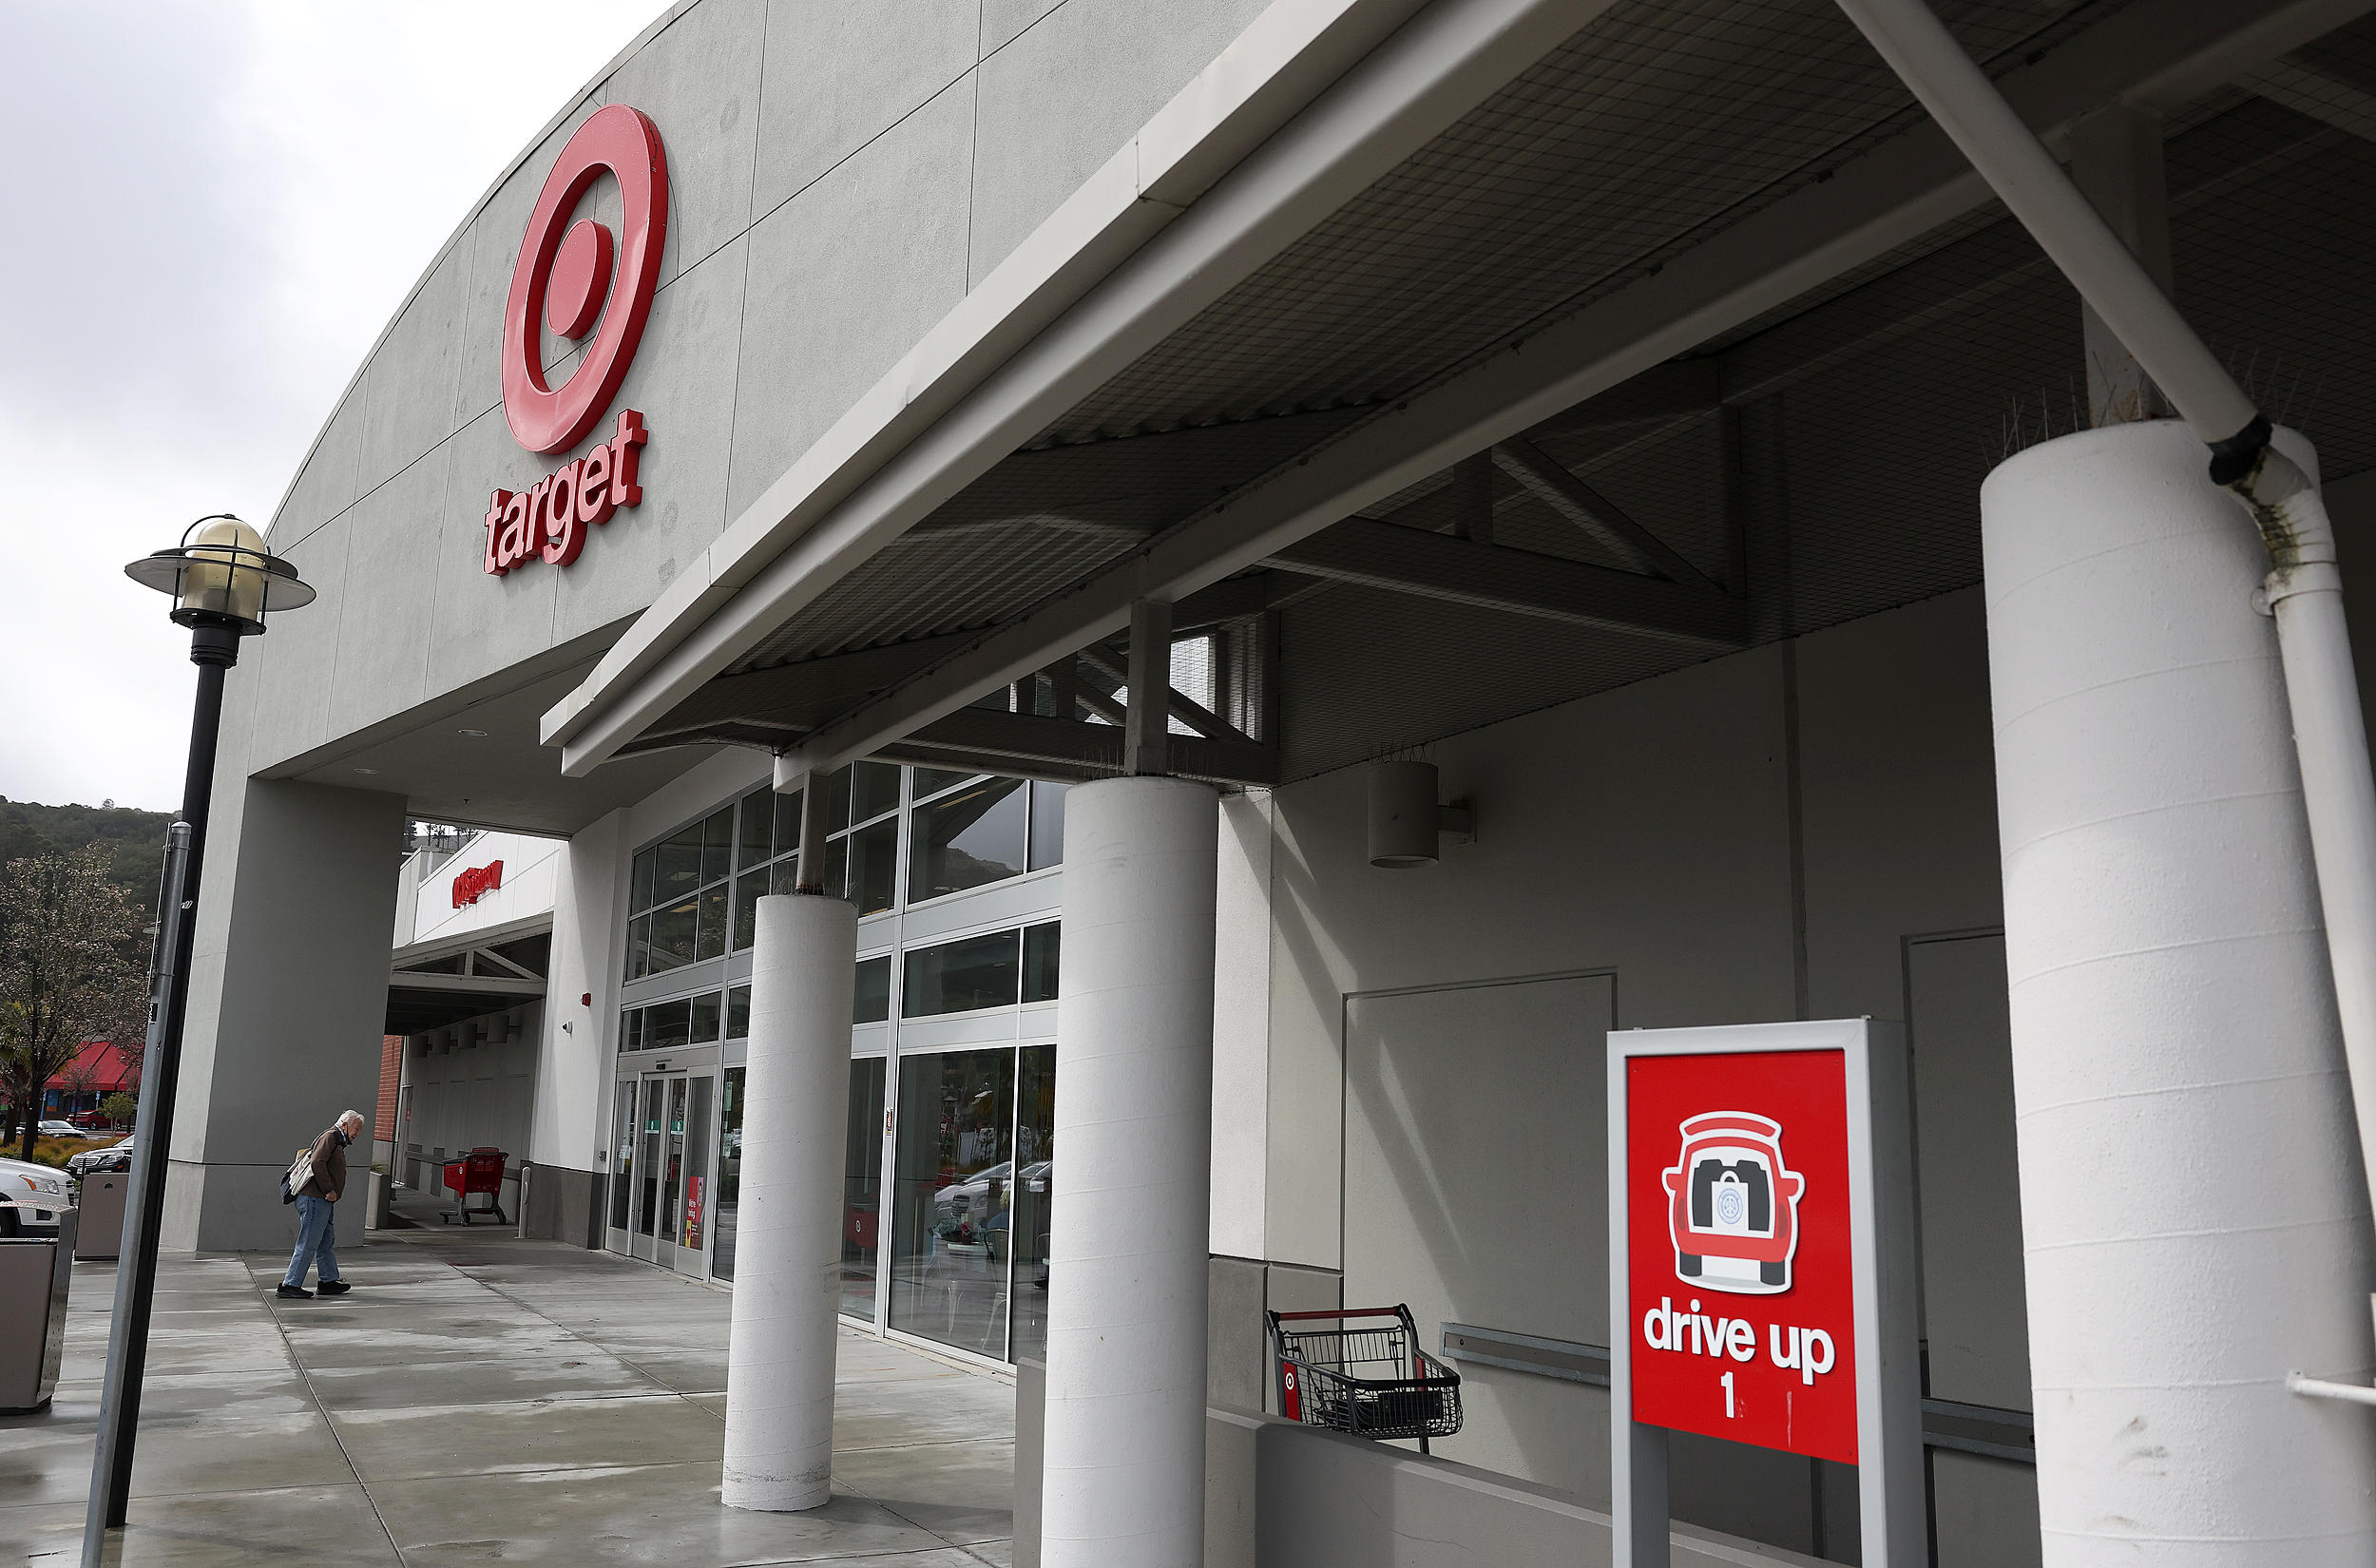 Article claiming KitchenAid has pulled items from Target shelves is satire